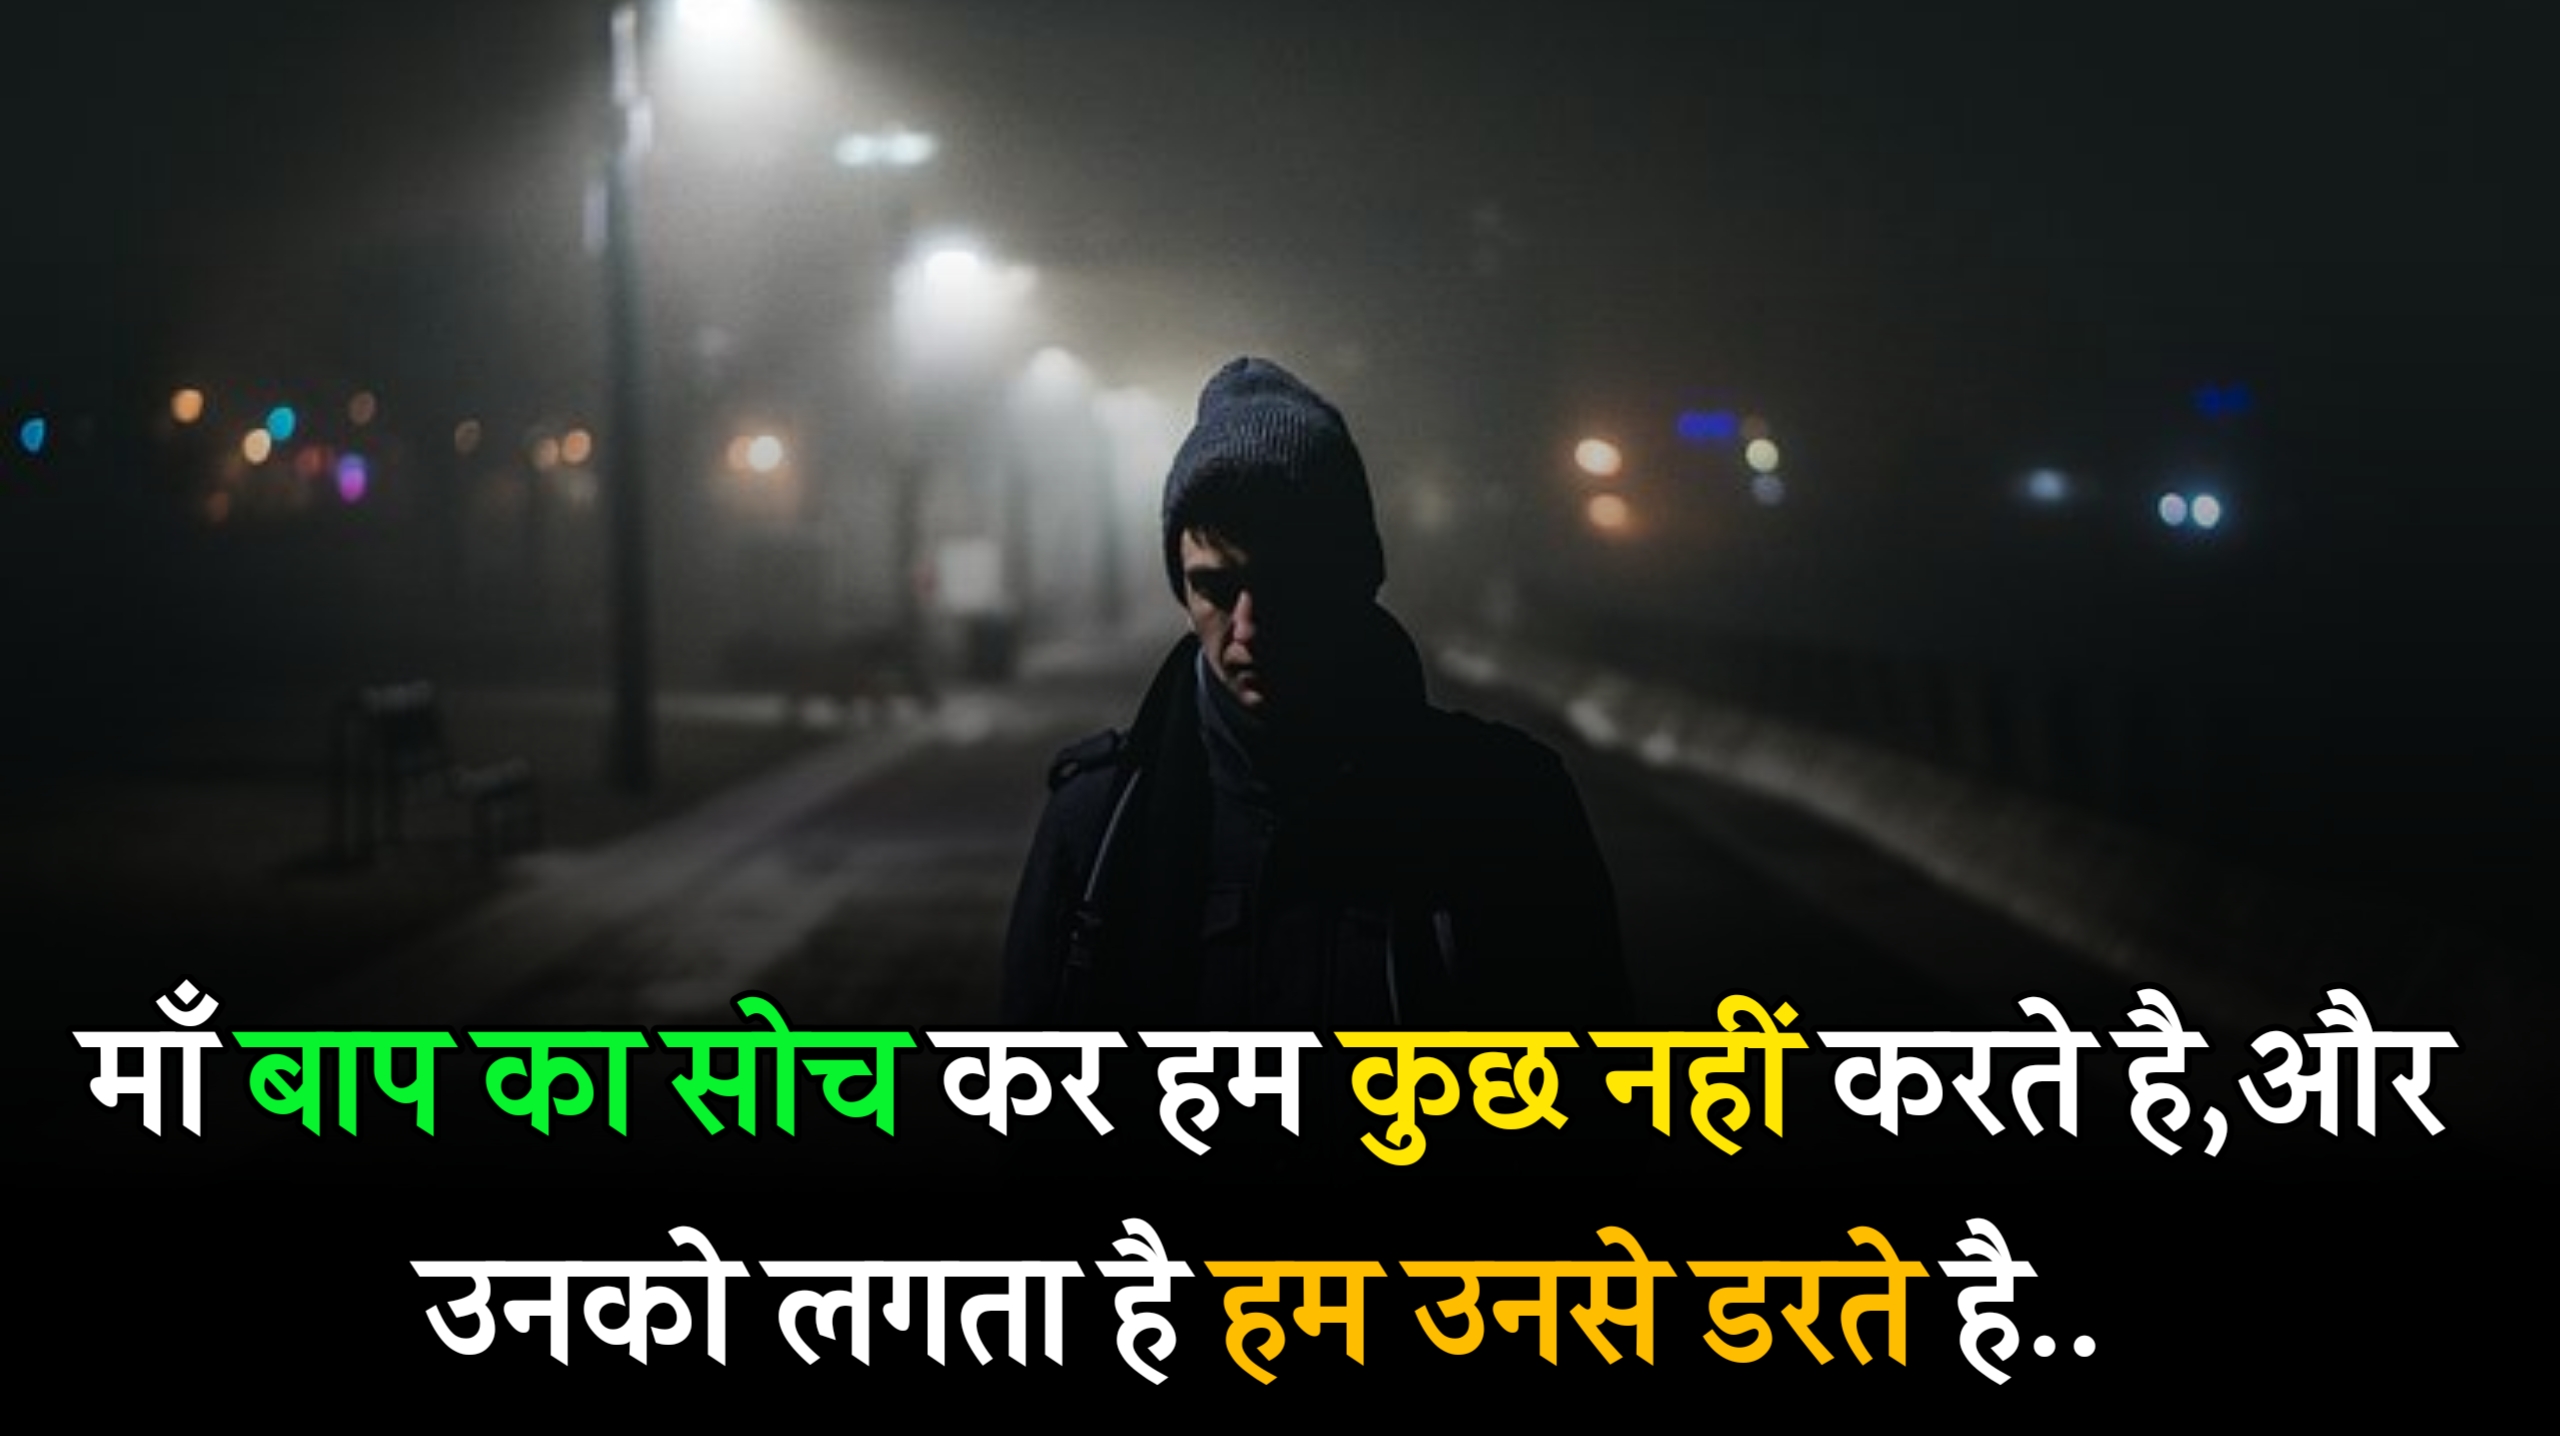 Alone cry sad quotes in hindi ,sad quotes in Hindi,Alone quotes in Hindi,Alone sad quotes in hindi , Attitude happy Alone quotes in hindi,Sad status in hindi ,sad shayari in Hindi, Alone status in hindi ,Alone shayari in Hindi